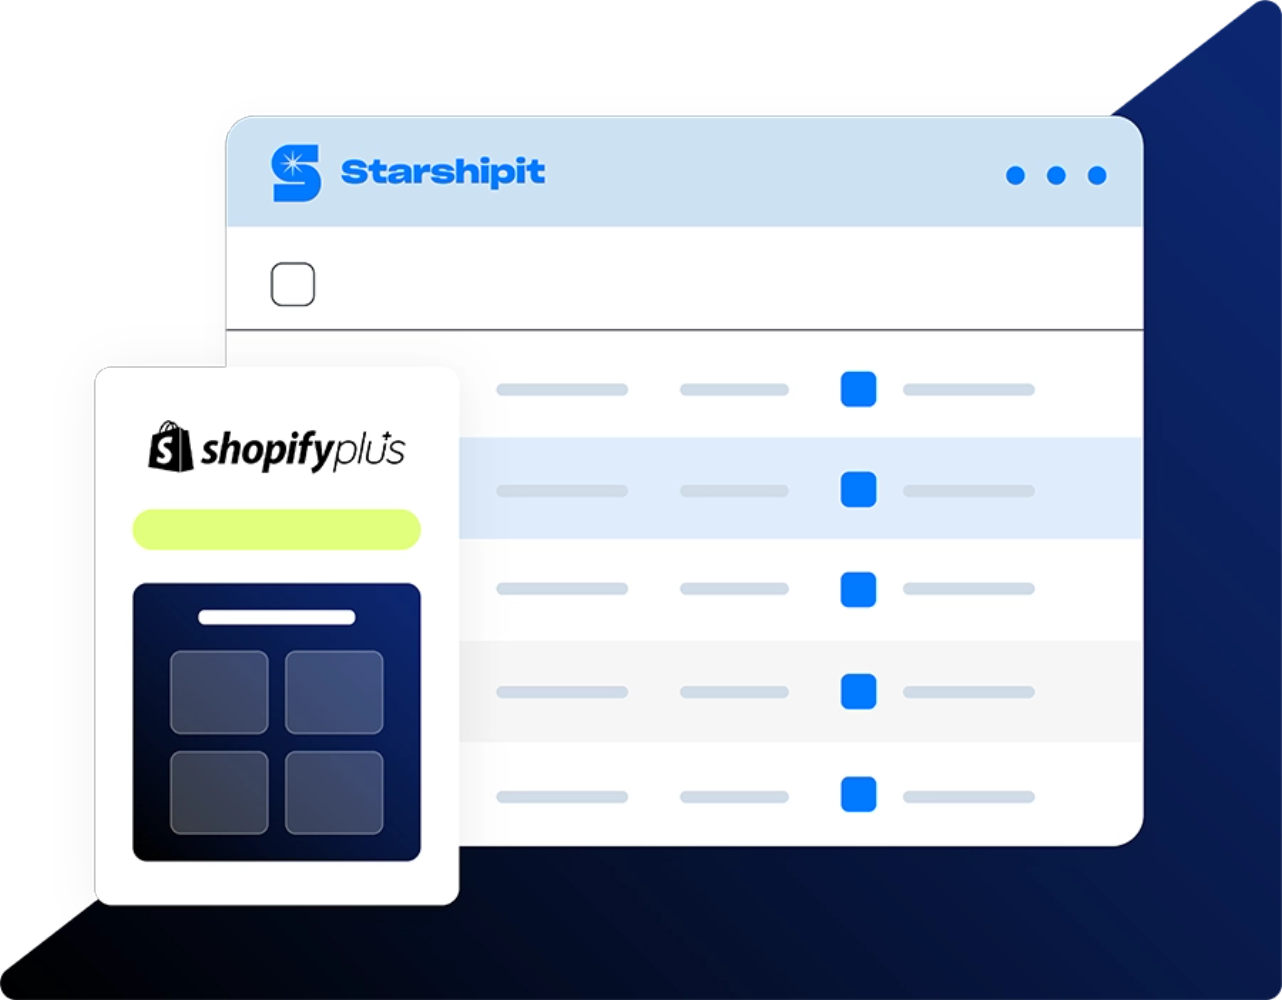 Starshipit and Shopify Plus Integration